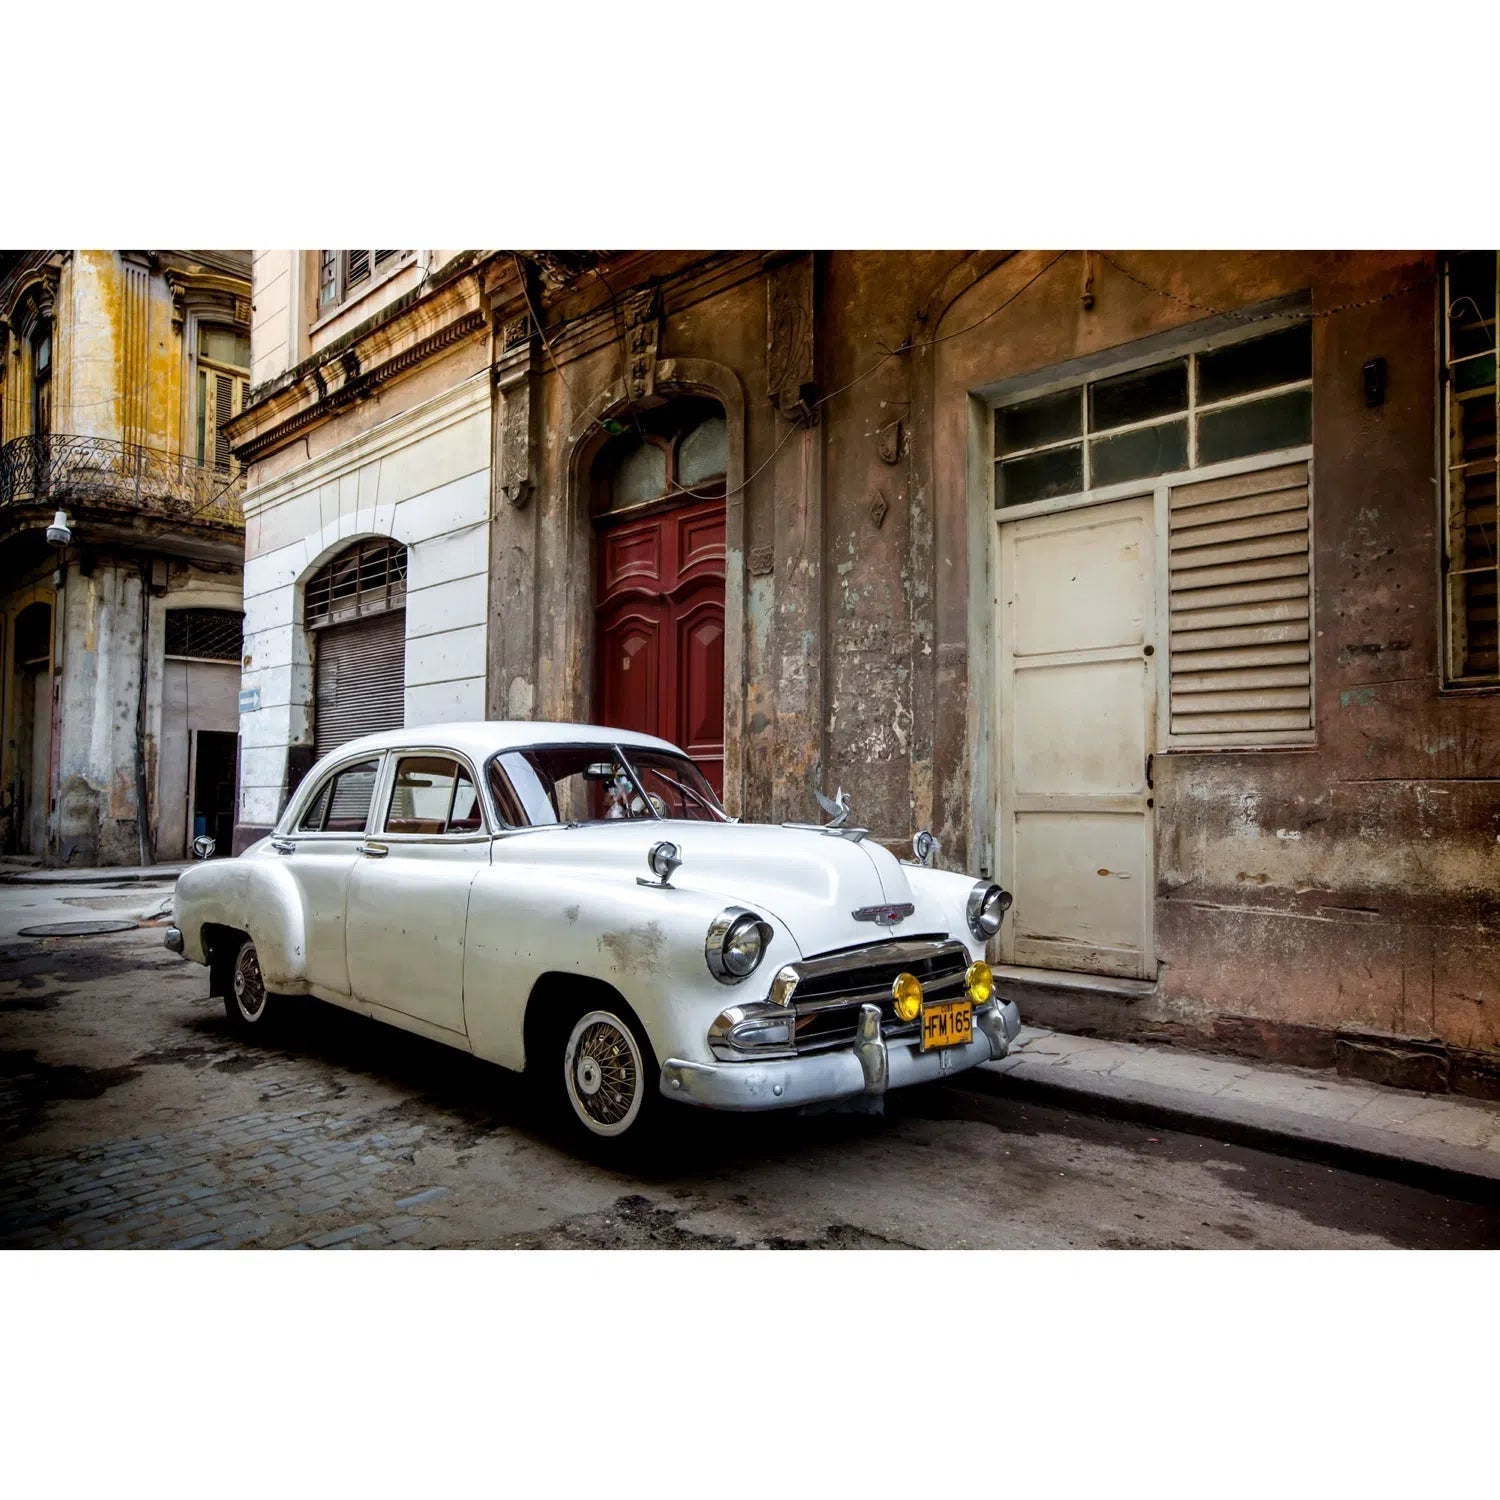 Cuba, old american car, in white-Imagesdartistes